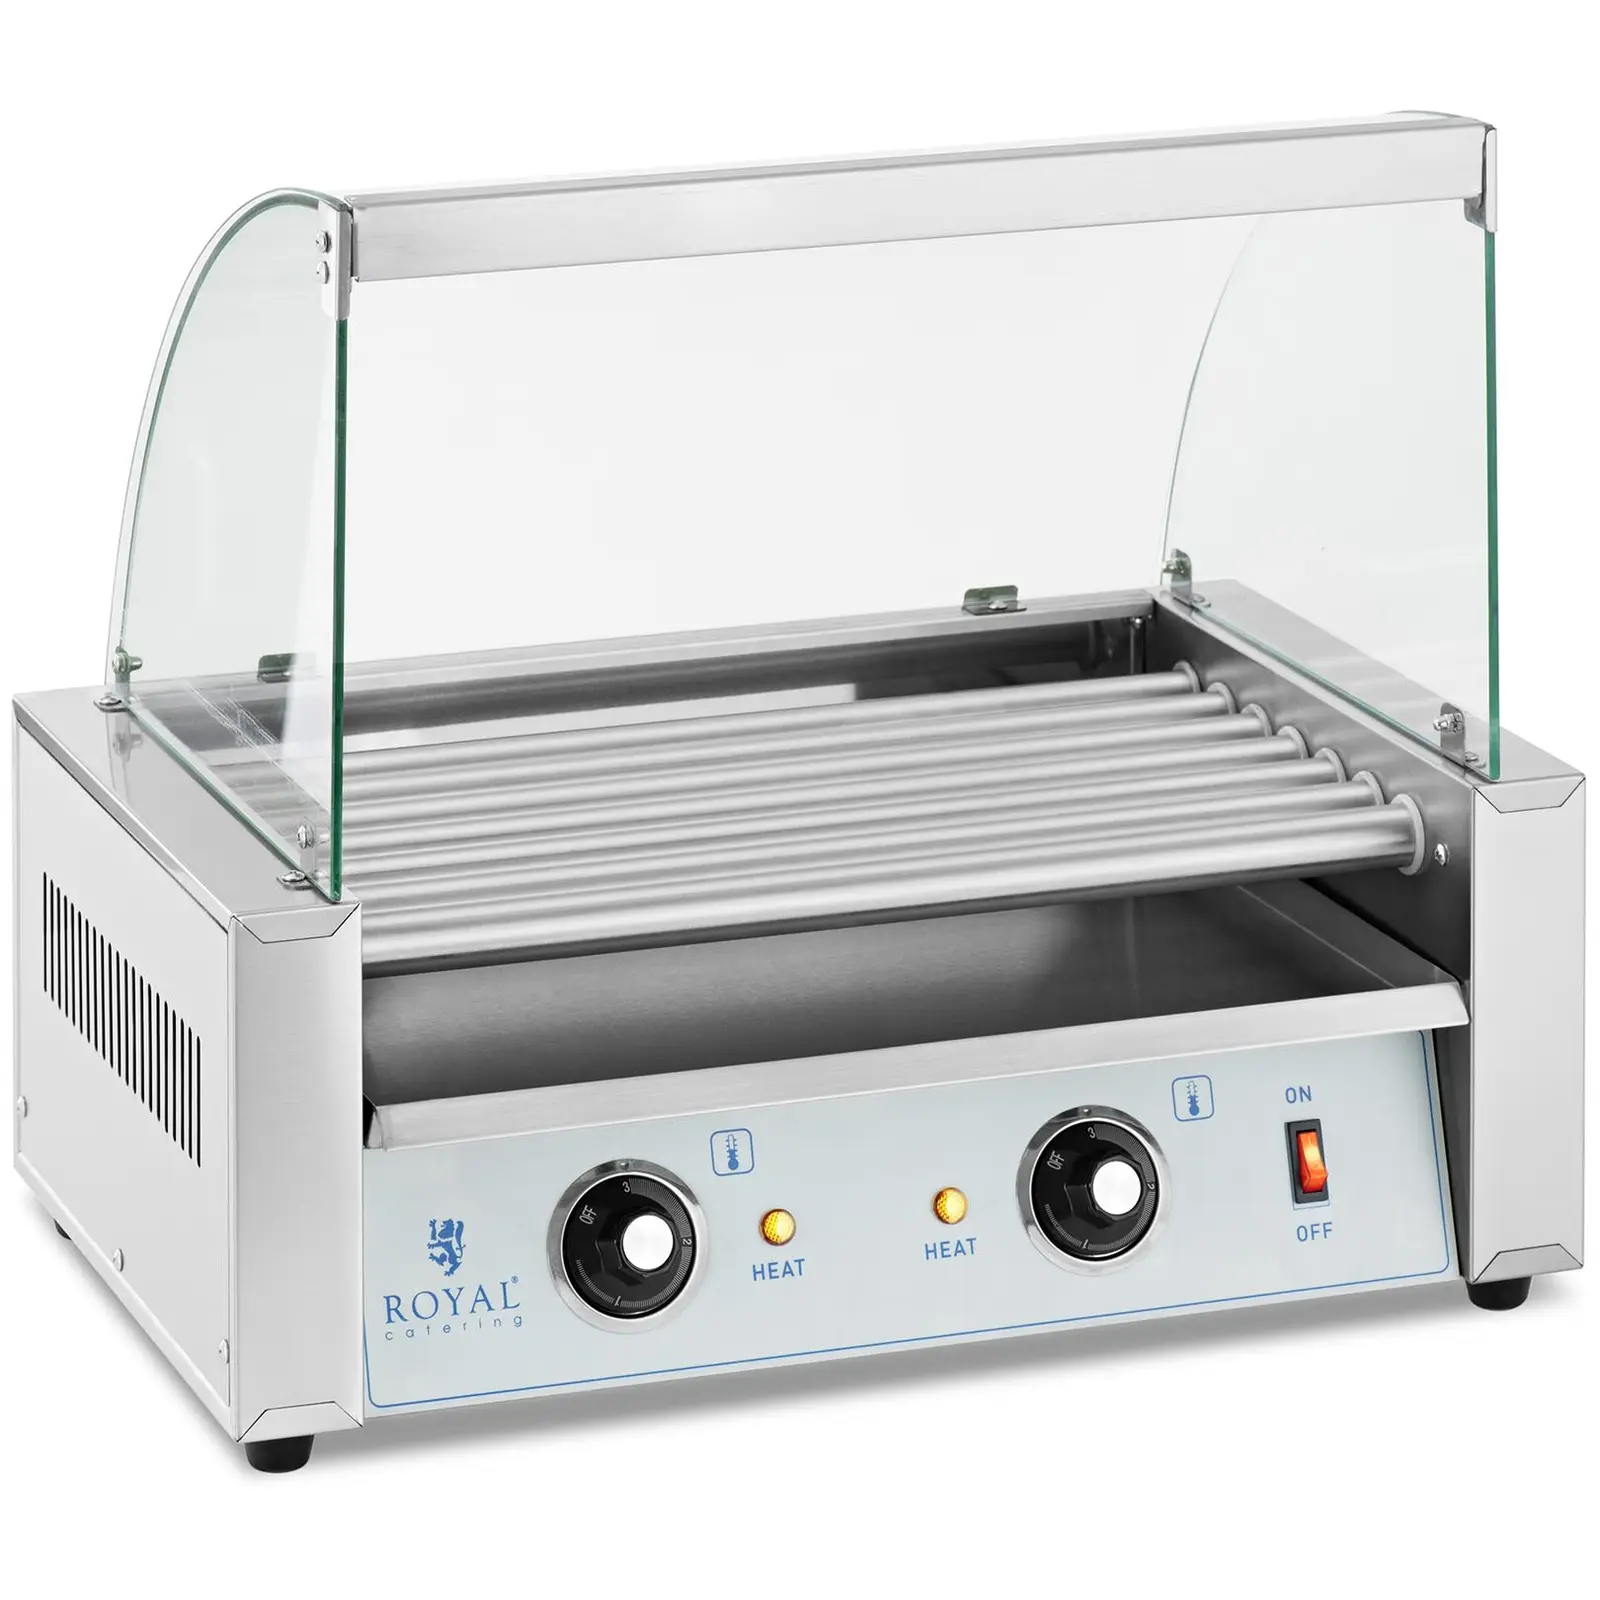 Hot Dog Grill - 7 rollers - Royal Catering - stainless steel - cover